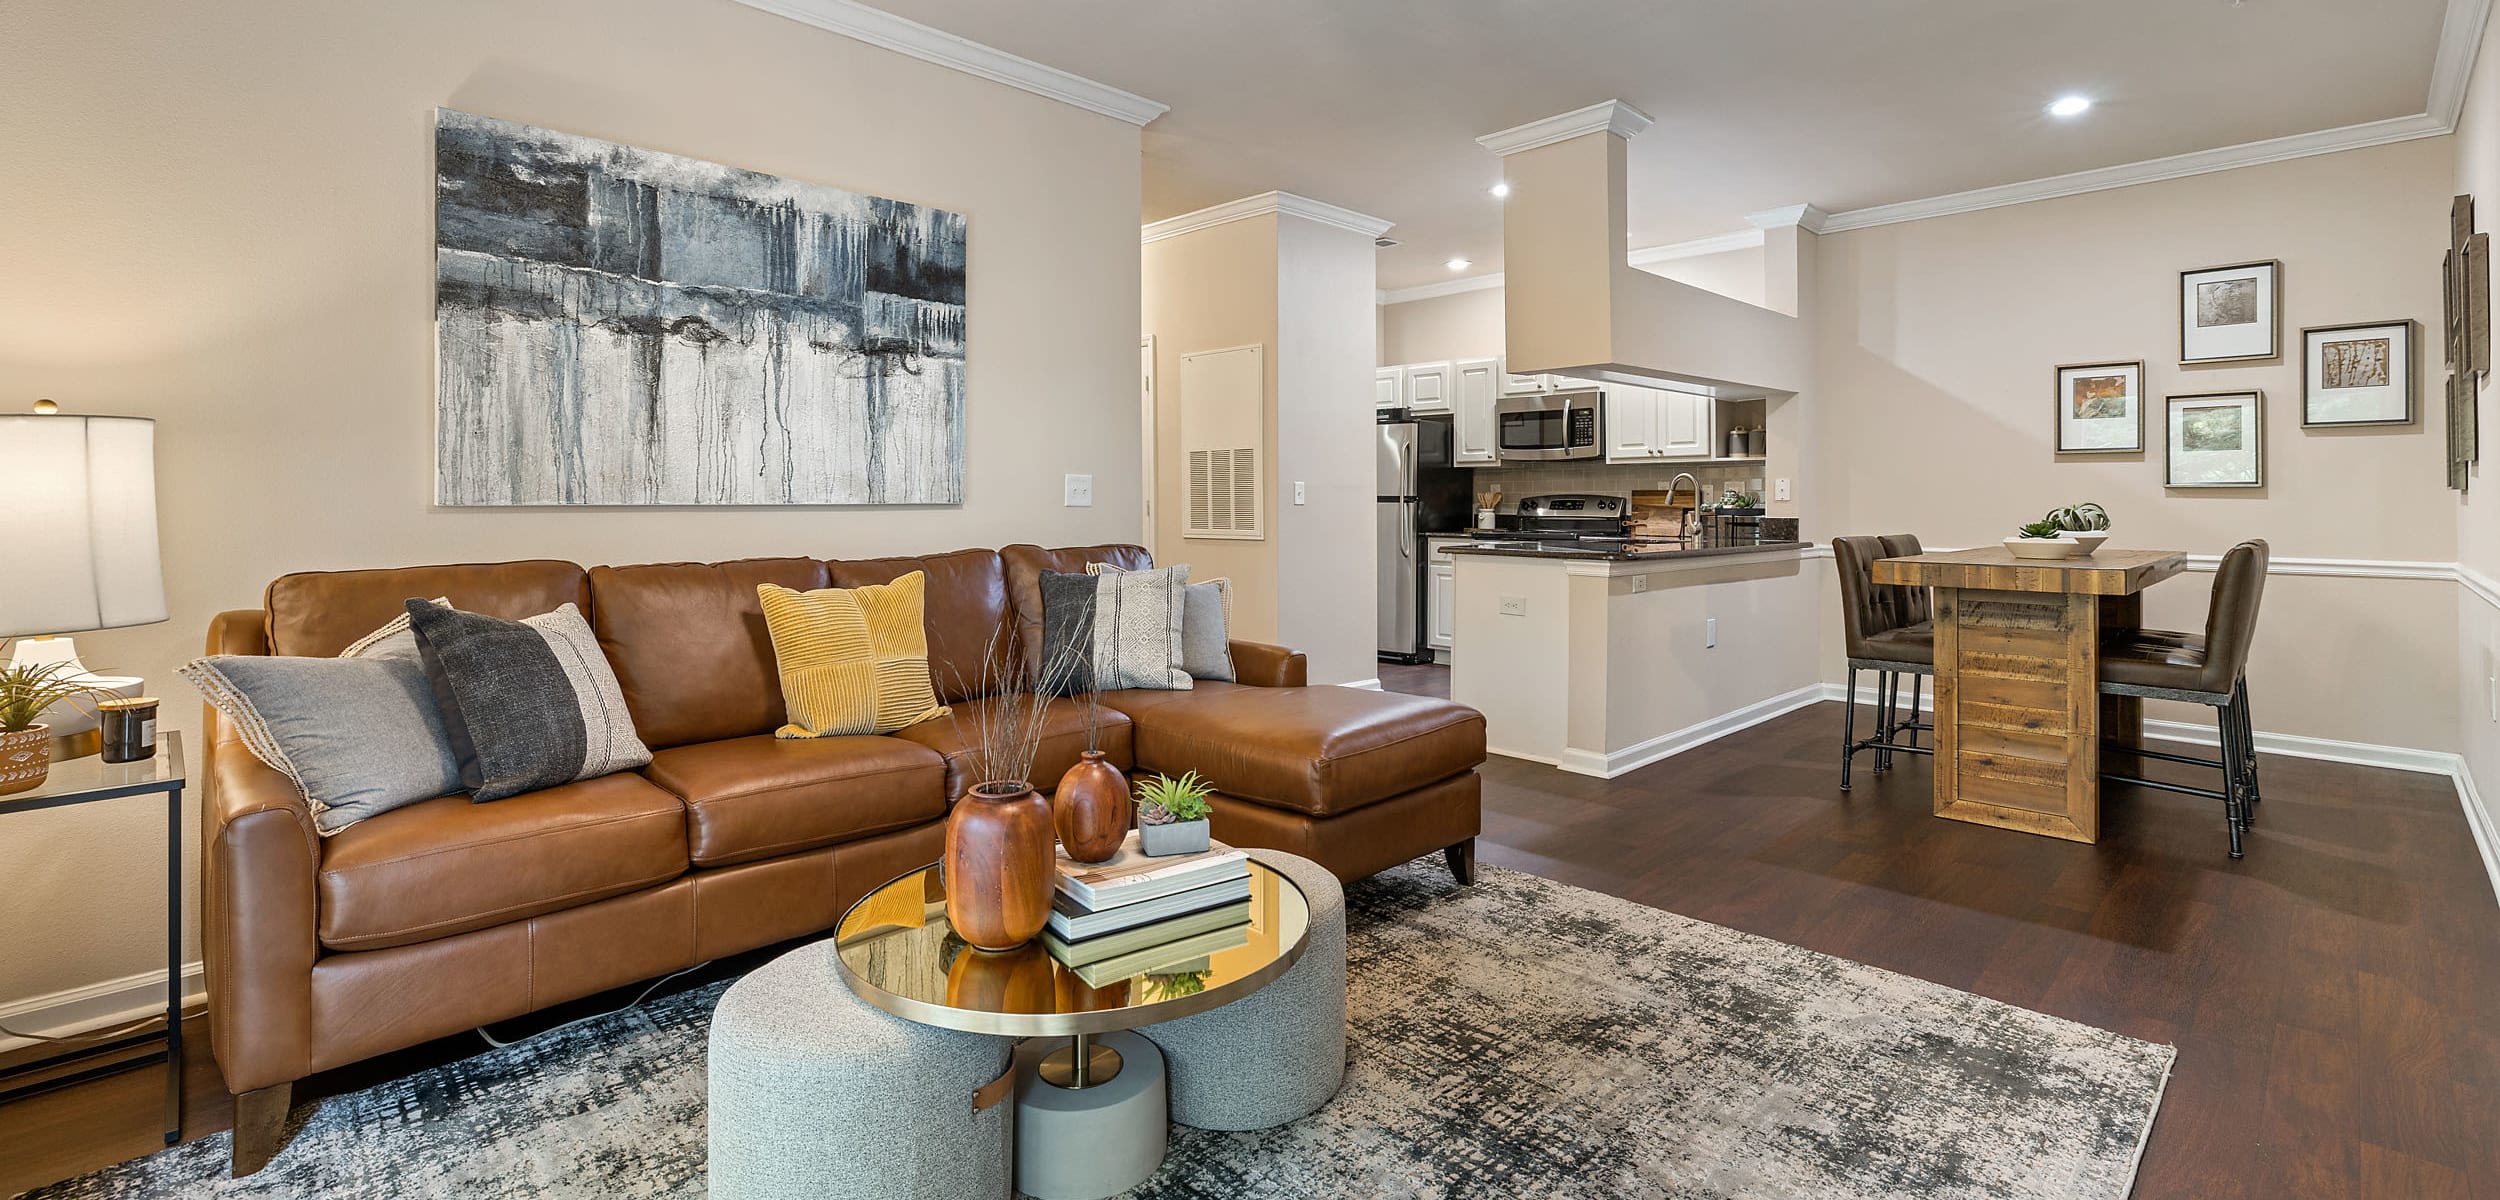 Spacious living area with modest dining area and wood flooring at Marquis at Carmel Commons in Charlotte, North Carolina